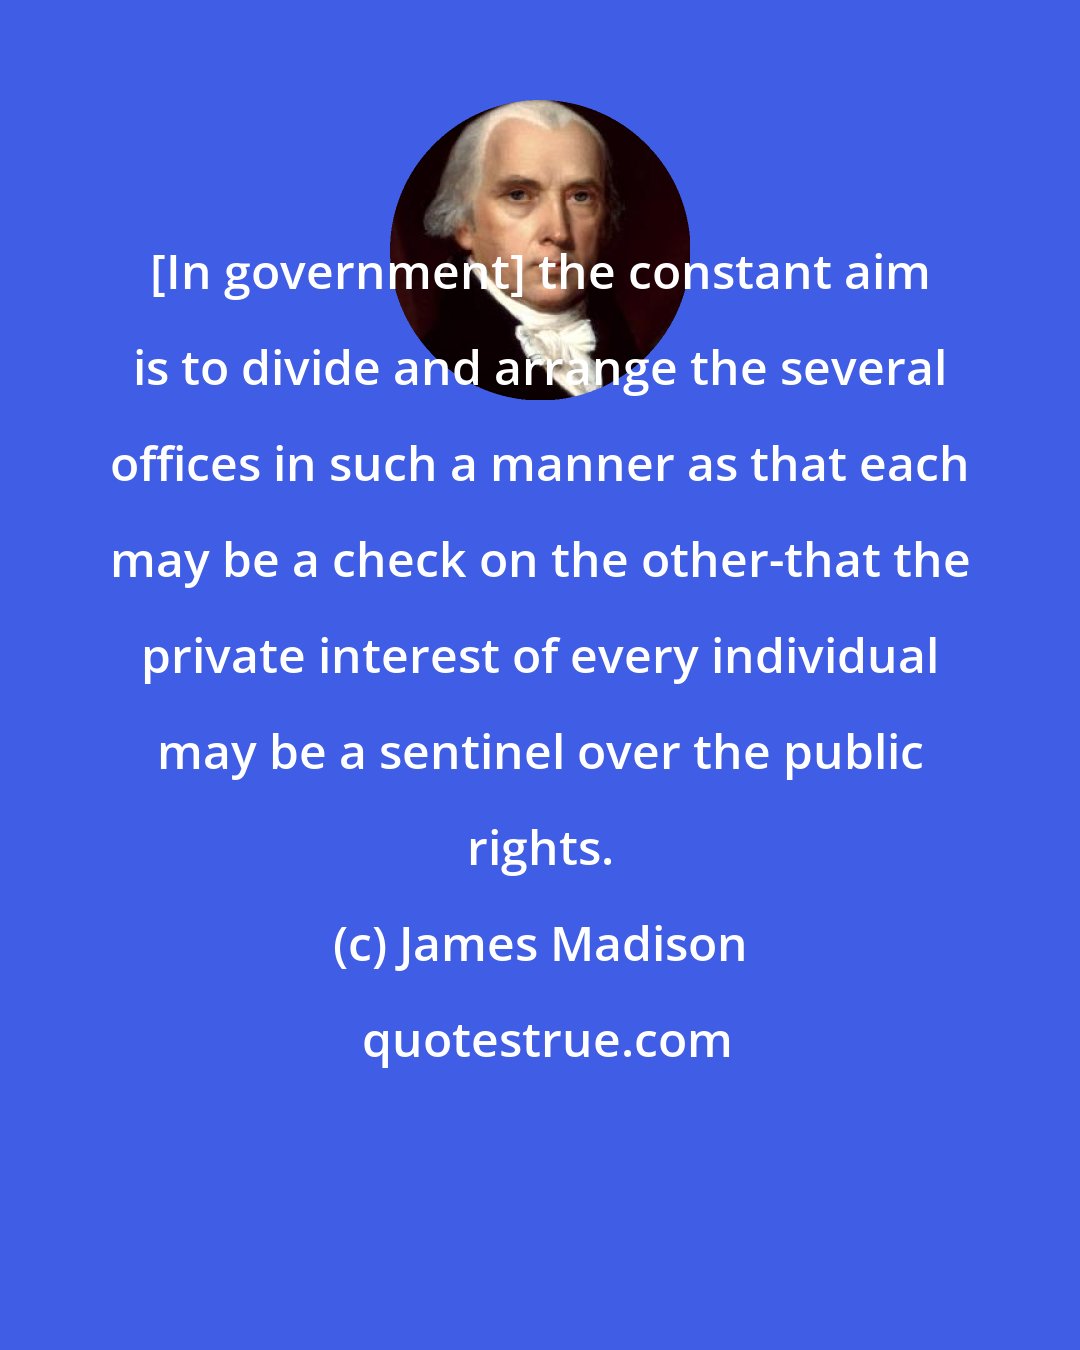 James Madison: [In government] the constant aim is to divide and arrange the several offices in such a manner as that each may be a check on the other-that the private interest of every individual may be a sentinel over the public rights.